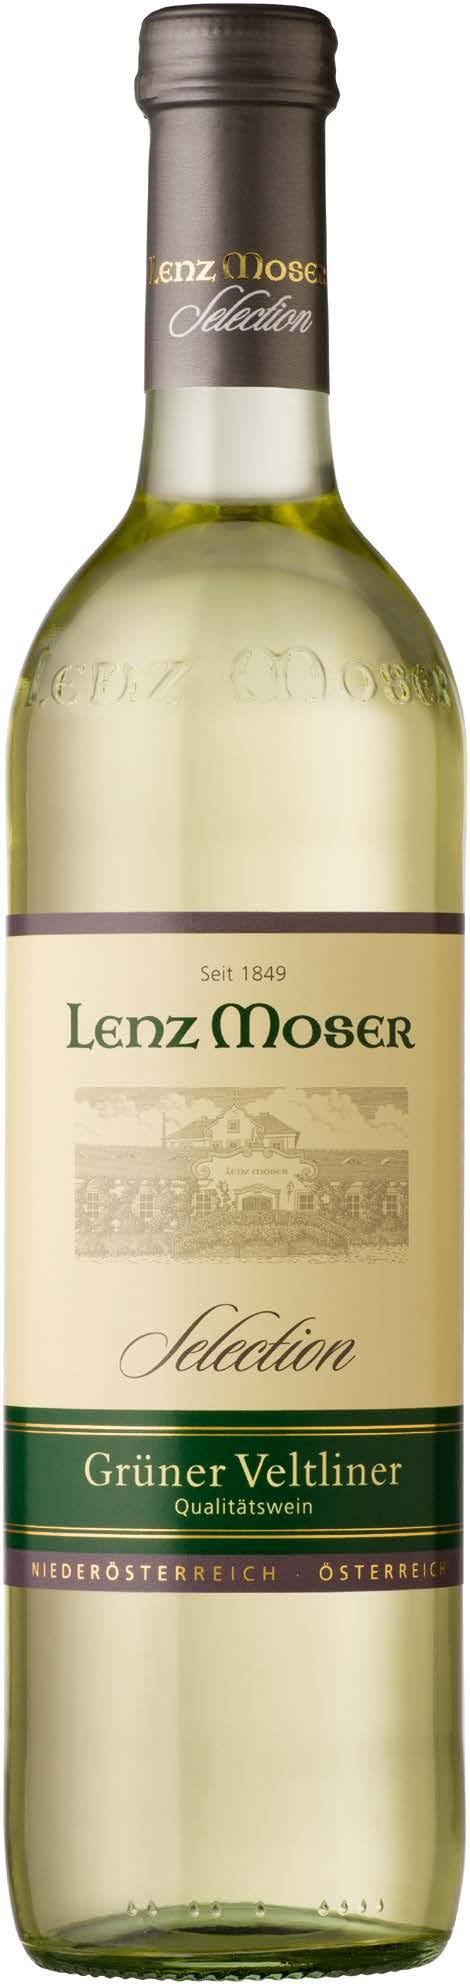 A unique Lenz Moser relief was also introduced to ensure that